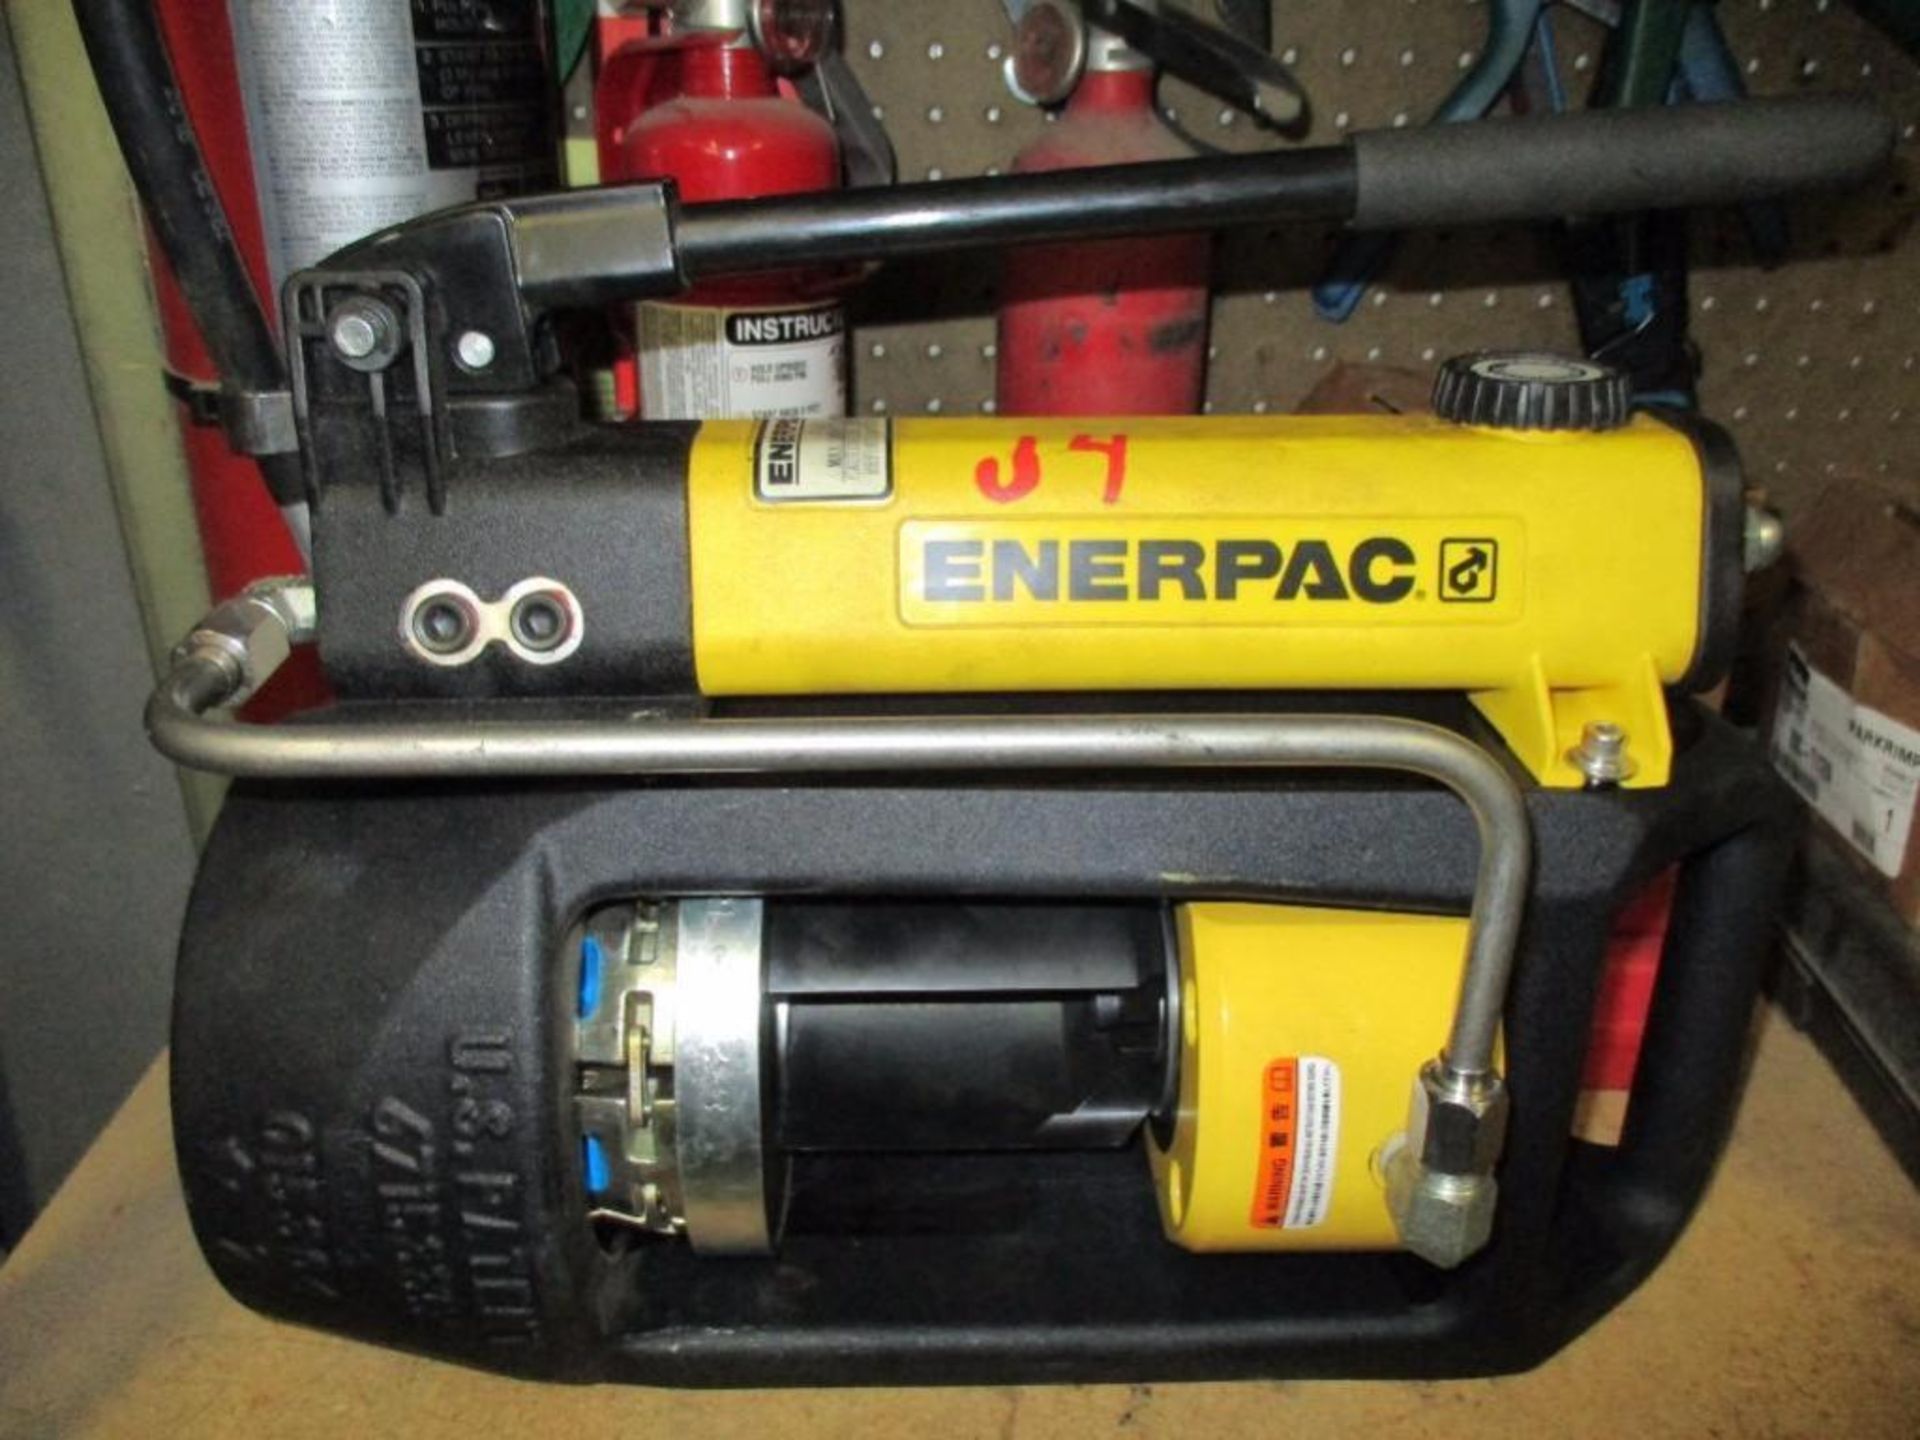 Enerpac parker hydraulic hose crimper with Jaws Parker dies. Rigging Fee: $15